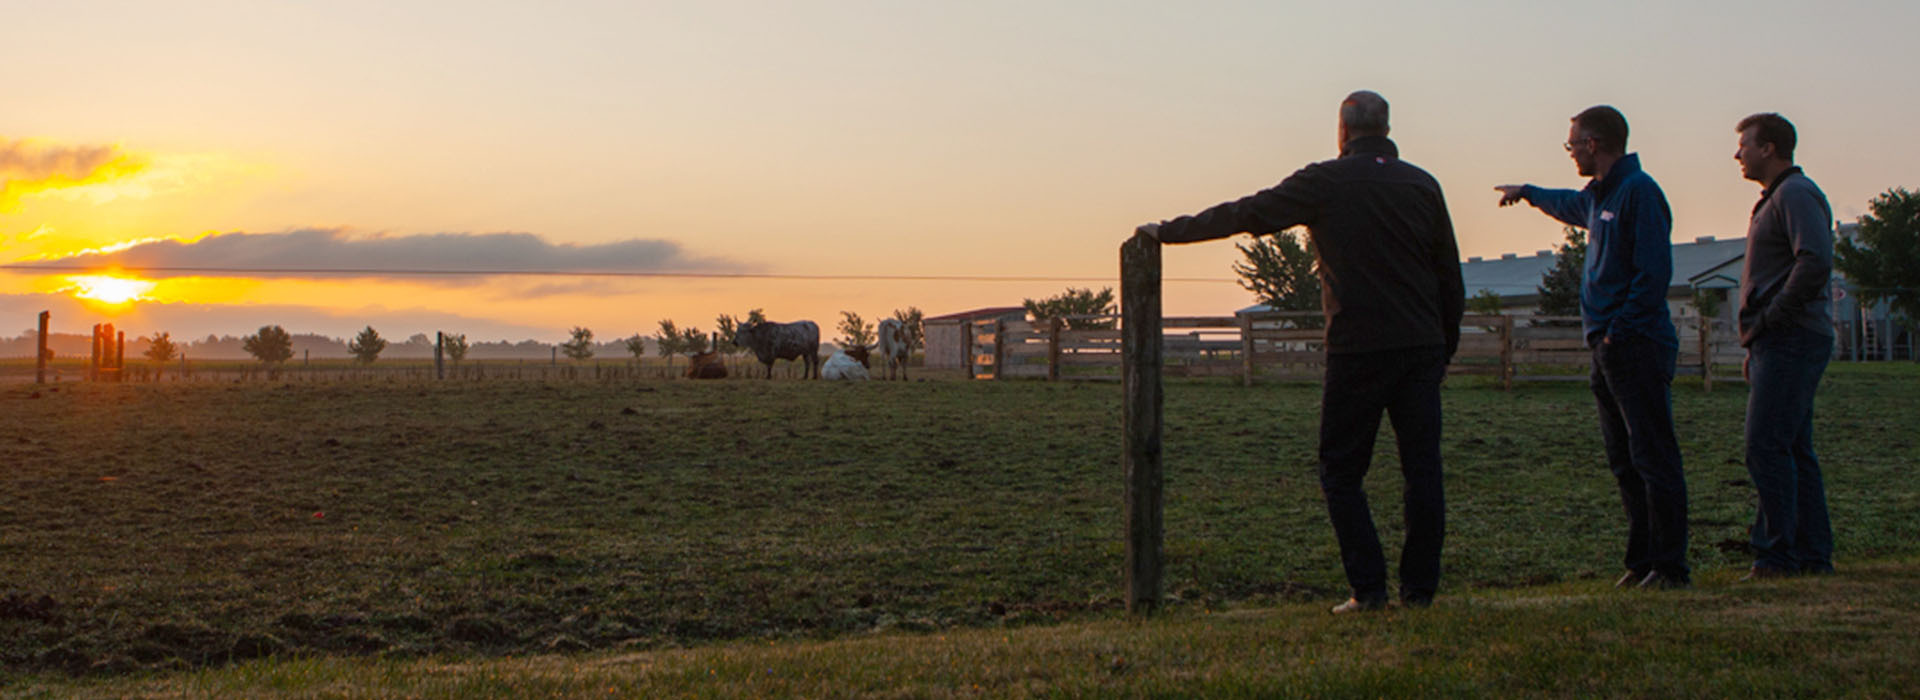 Farming family talking to an MNP consultant in an open pasture at sunset. One person is leaning against a wooden fence.